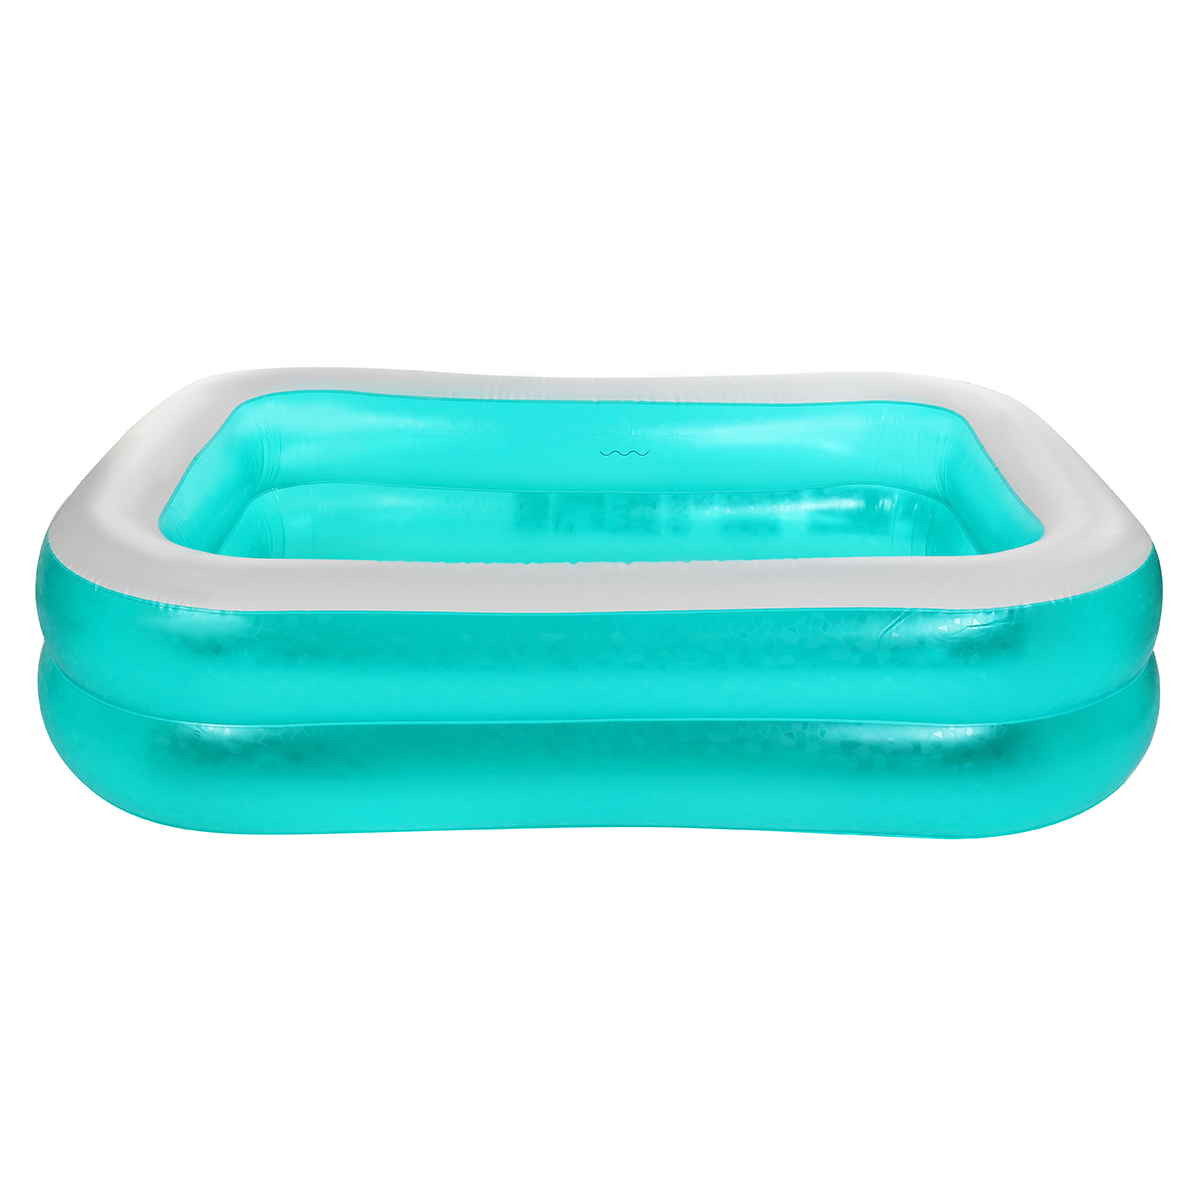 181-x-130CM-Inflatable-Swimming-Pool-Children-Adults--Summer-Bathing-Tub-Baby-Home-Use-Inflatable-Pa-1692685-4